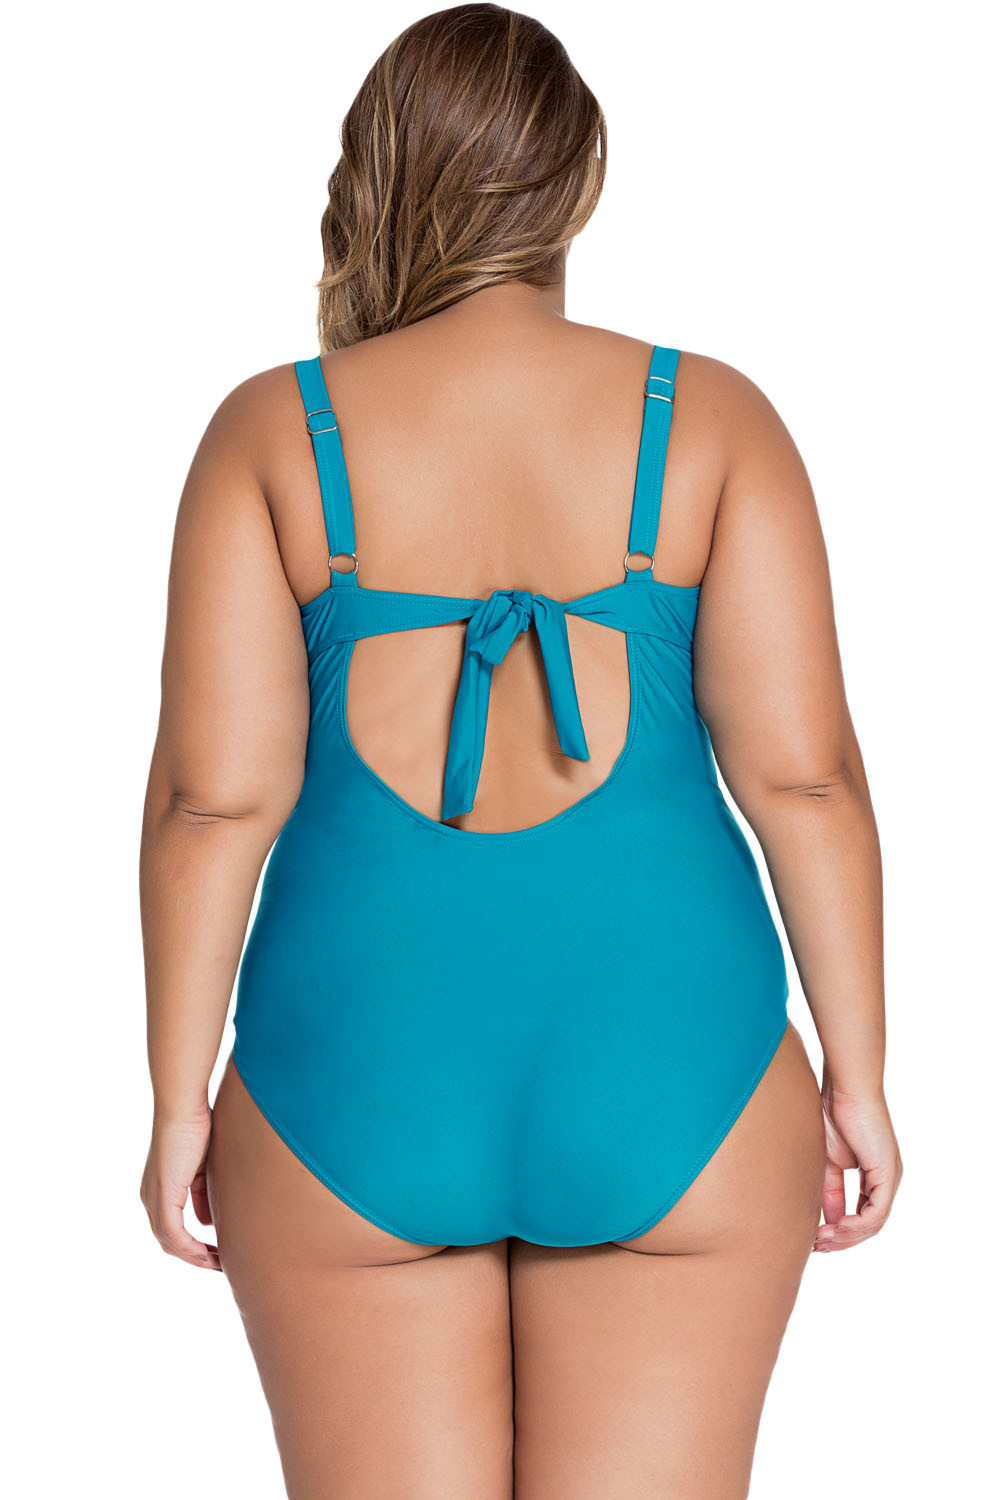 Summer-Plus-Size-Steel-Ring-Push-Up-Swimsuit-Suspenders-Backless-Sexy-Swimwear-1110048